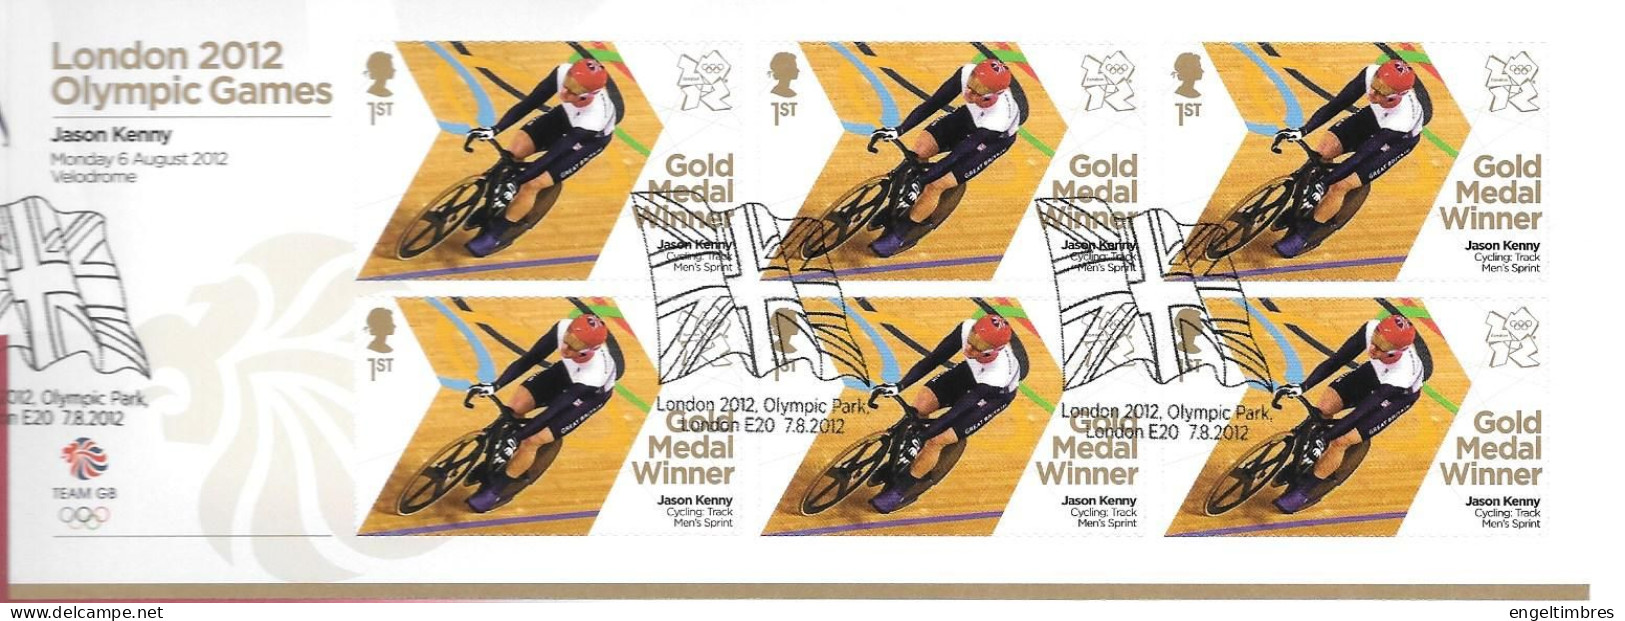 Gb 2012 Olympics GOLD MEDAL WINNER Sheet Of 6 Stamps  FDC --  JASON KENNY-  SEE  NOTES SEE NOTES - Unused Stamps